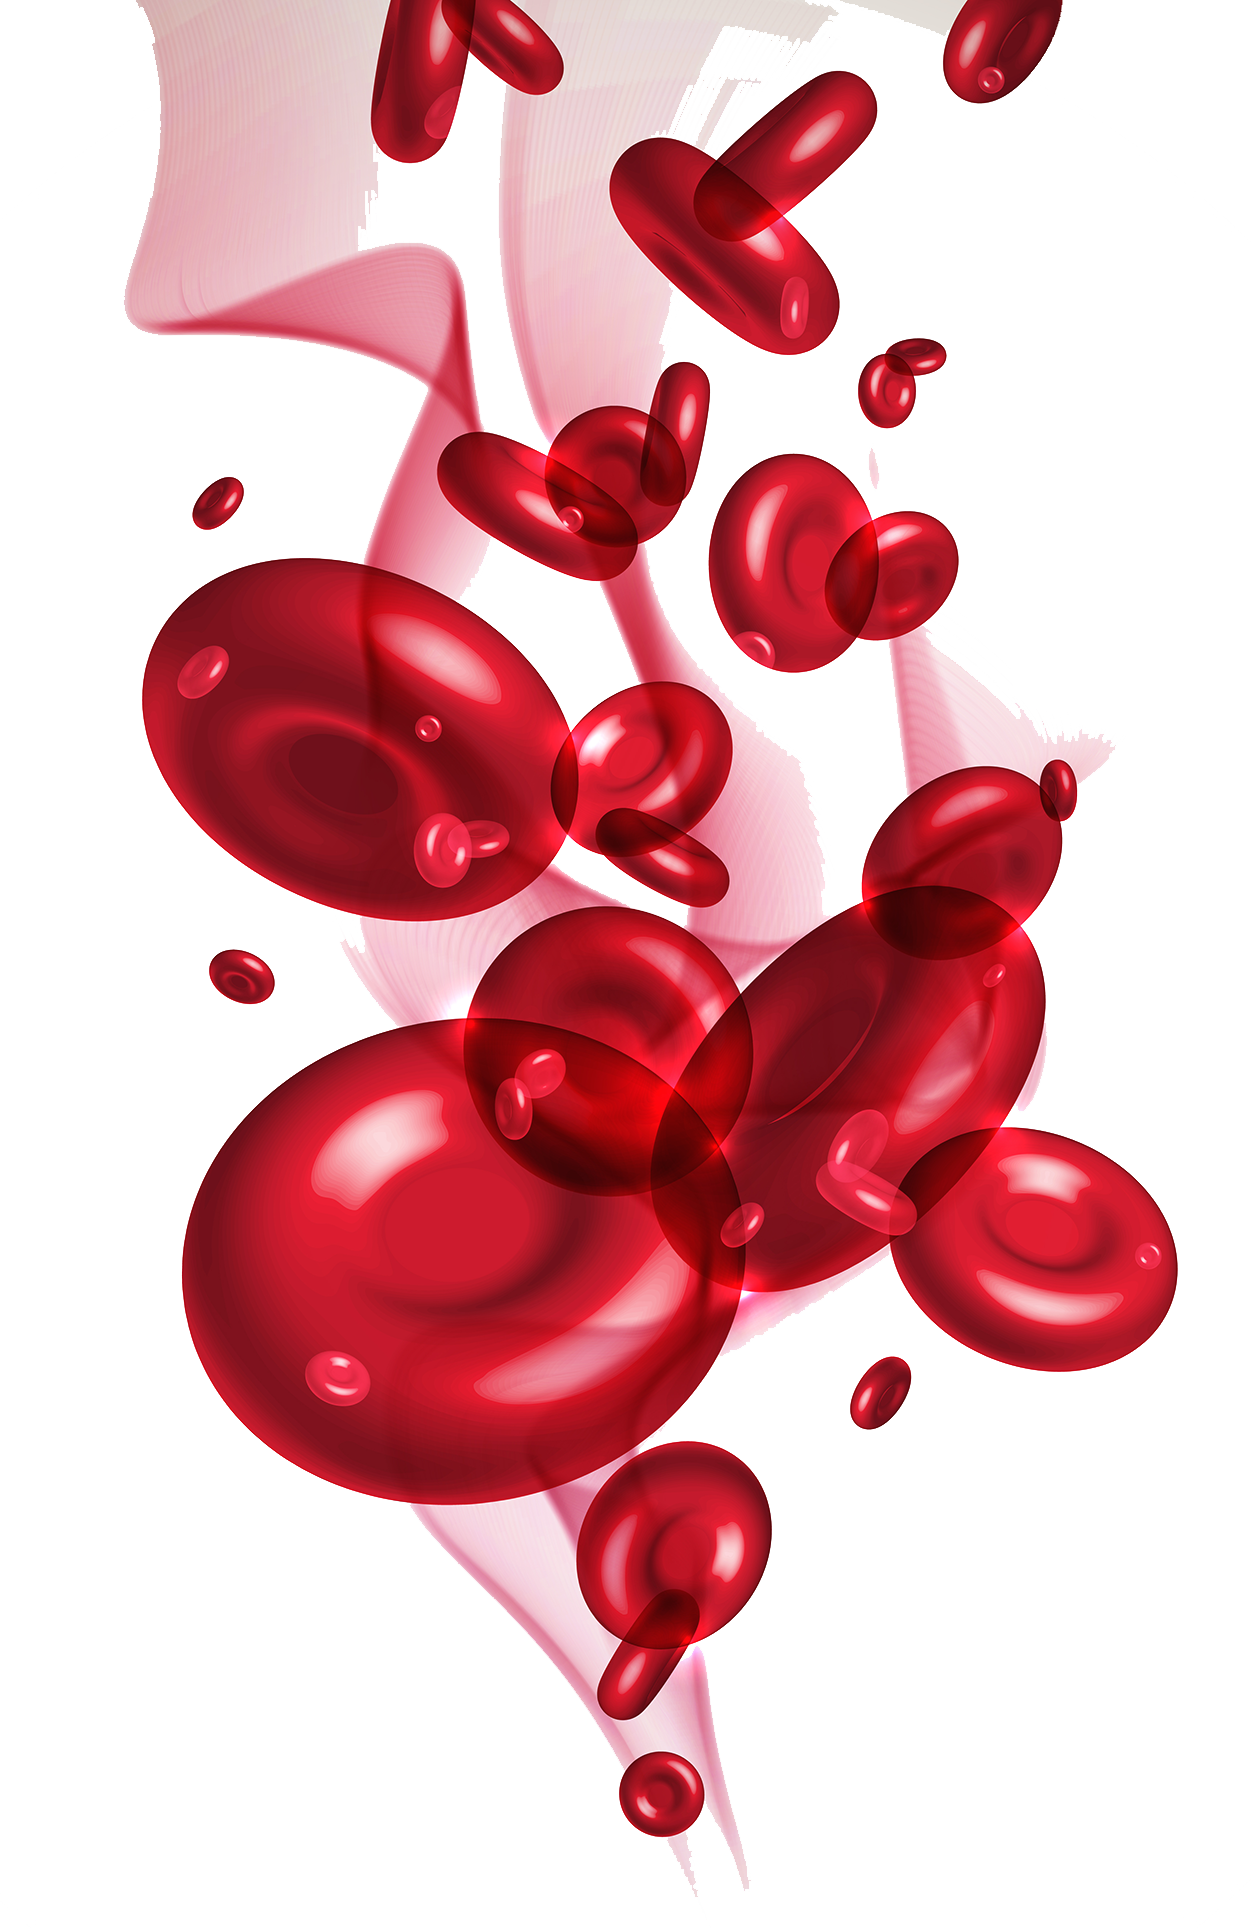 Red blood cells png. Cell transprent free download